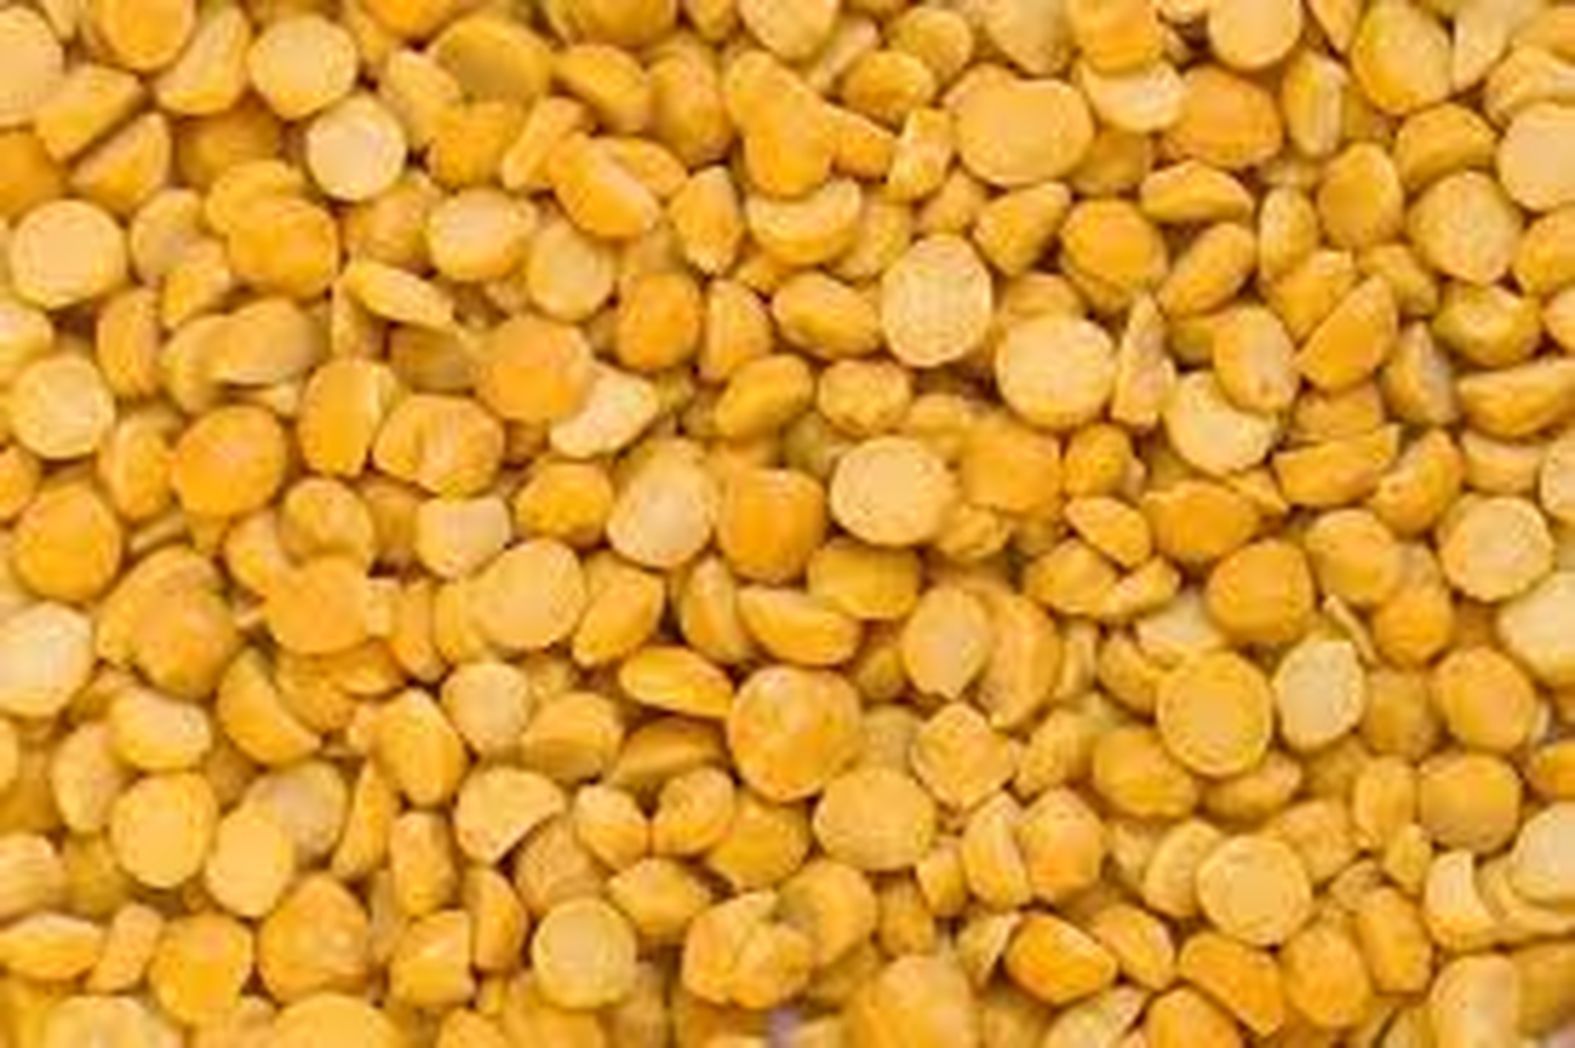 chana-dal--tur-and-masoor-dal-remained-soft.jpg